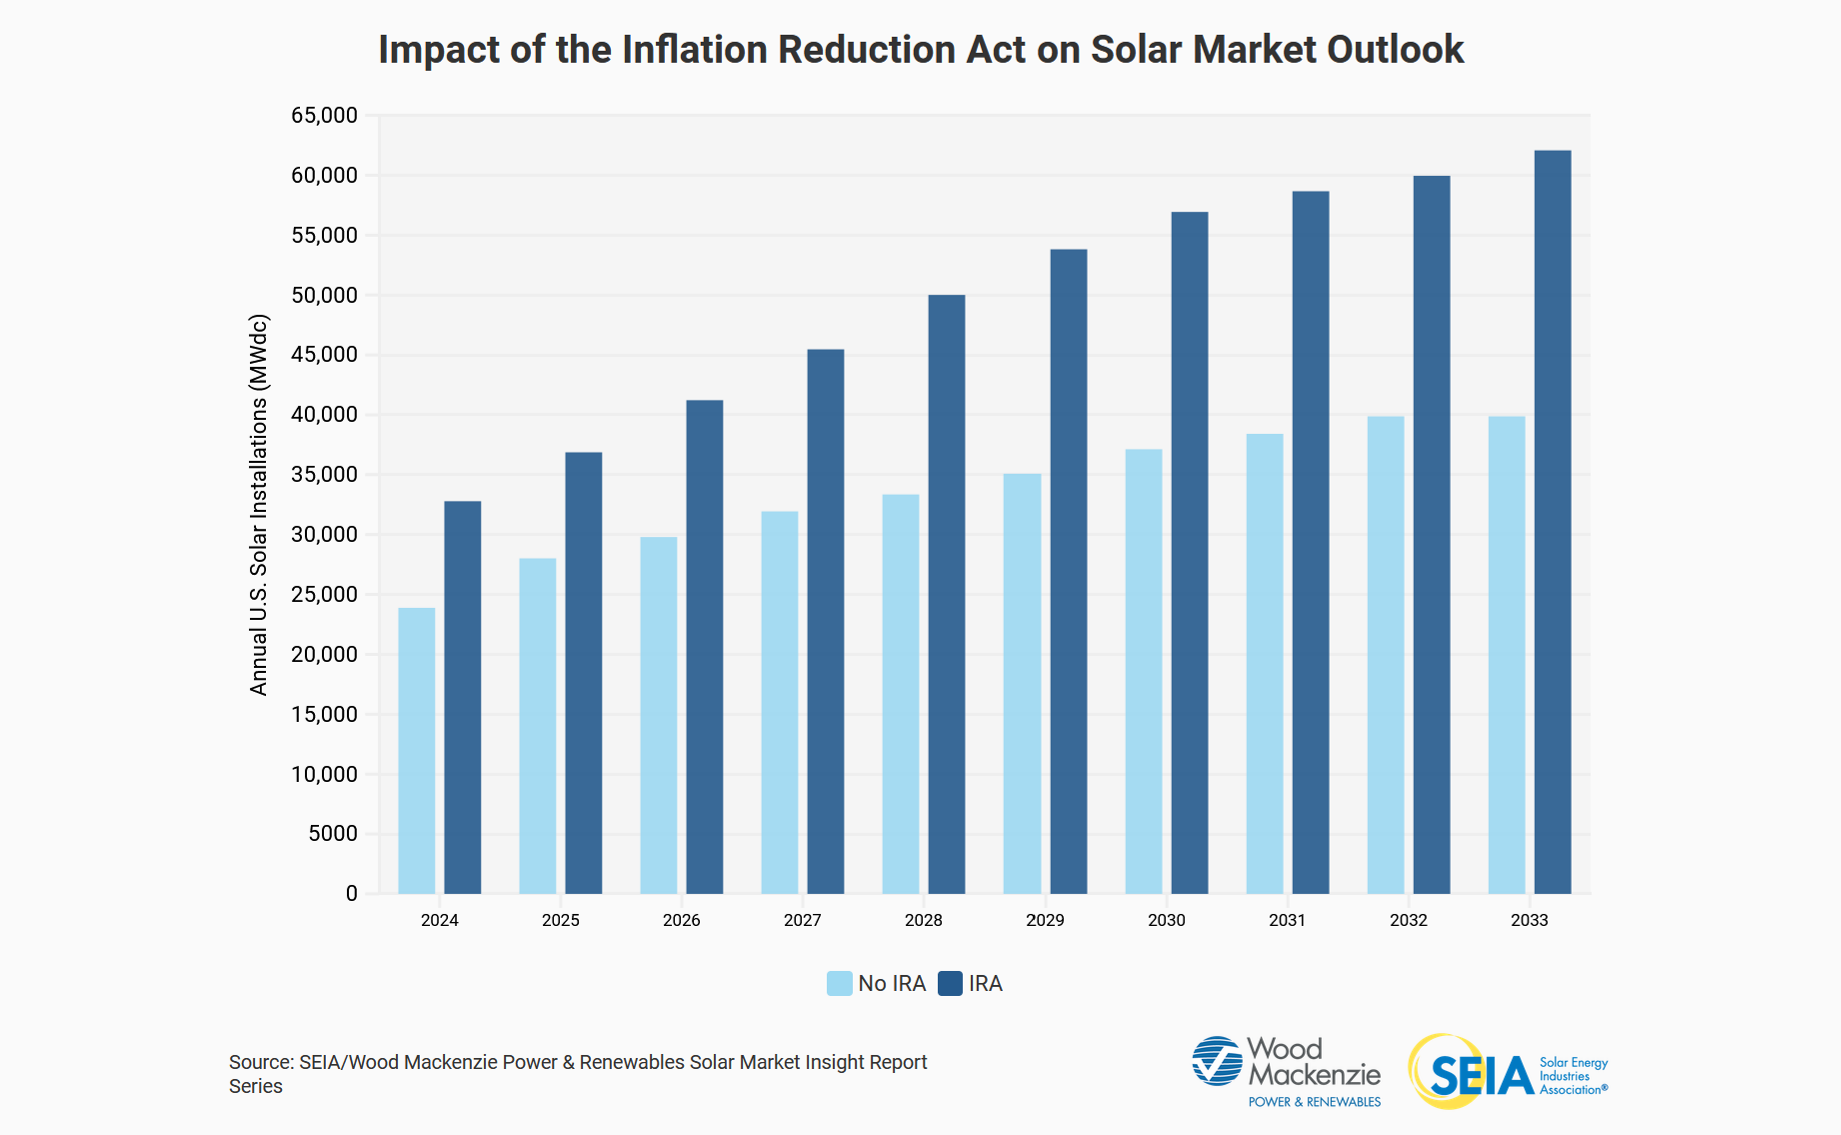 Graph comparing projected annual U.S. solar installations under an IRA investment scenario and no IRA investment scenario. Source: Impact of the Inflation Reduction Act Factsheet by the Solar Energy Industries Association and Wood Mackenzie.